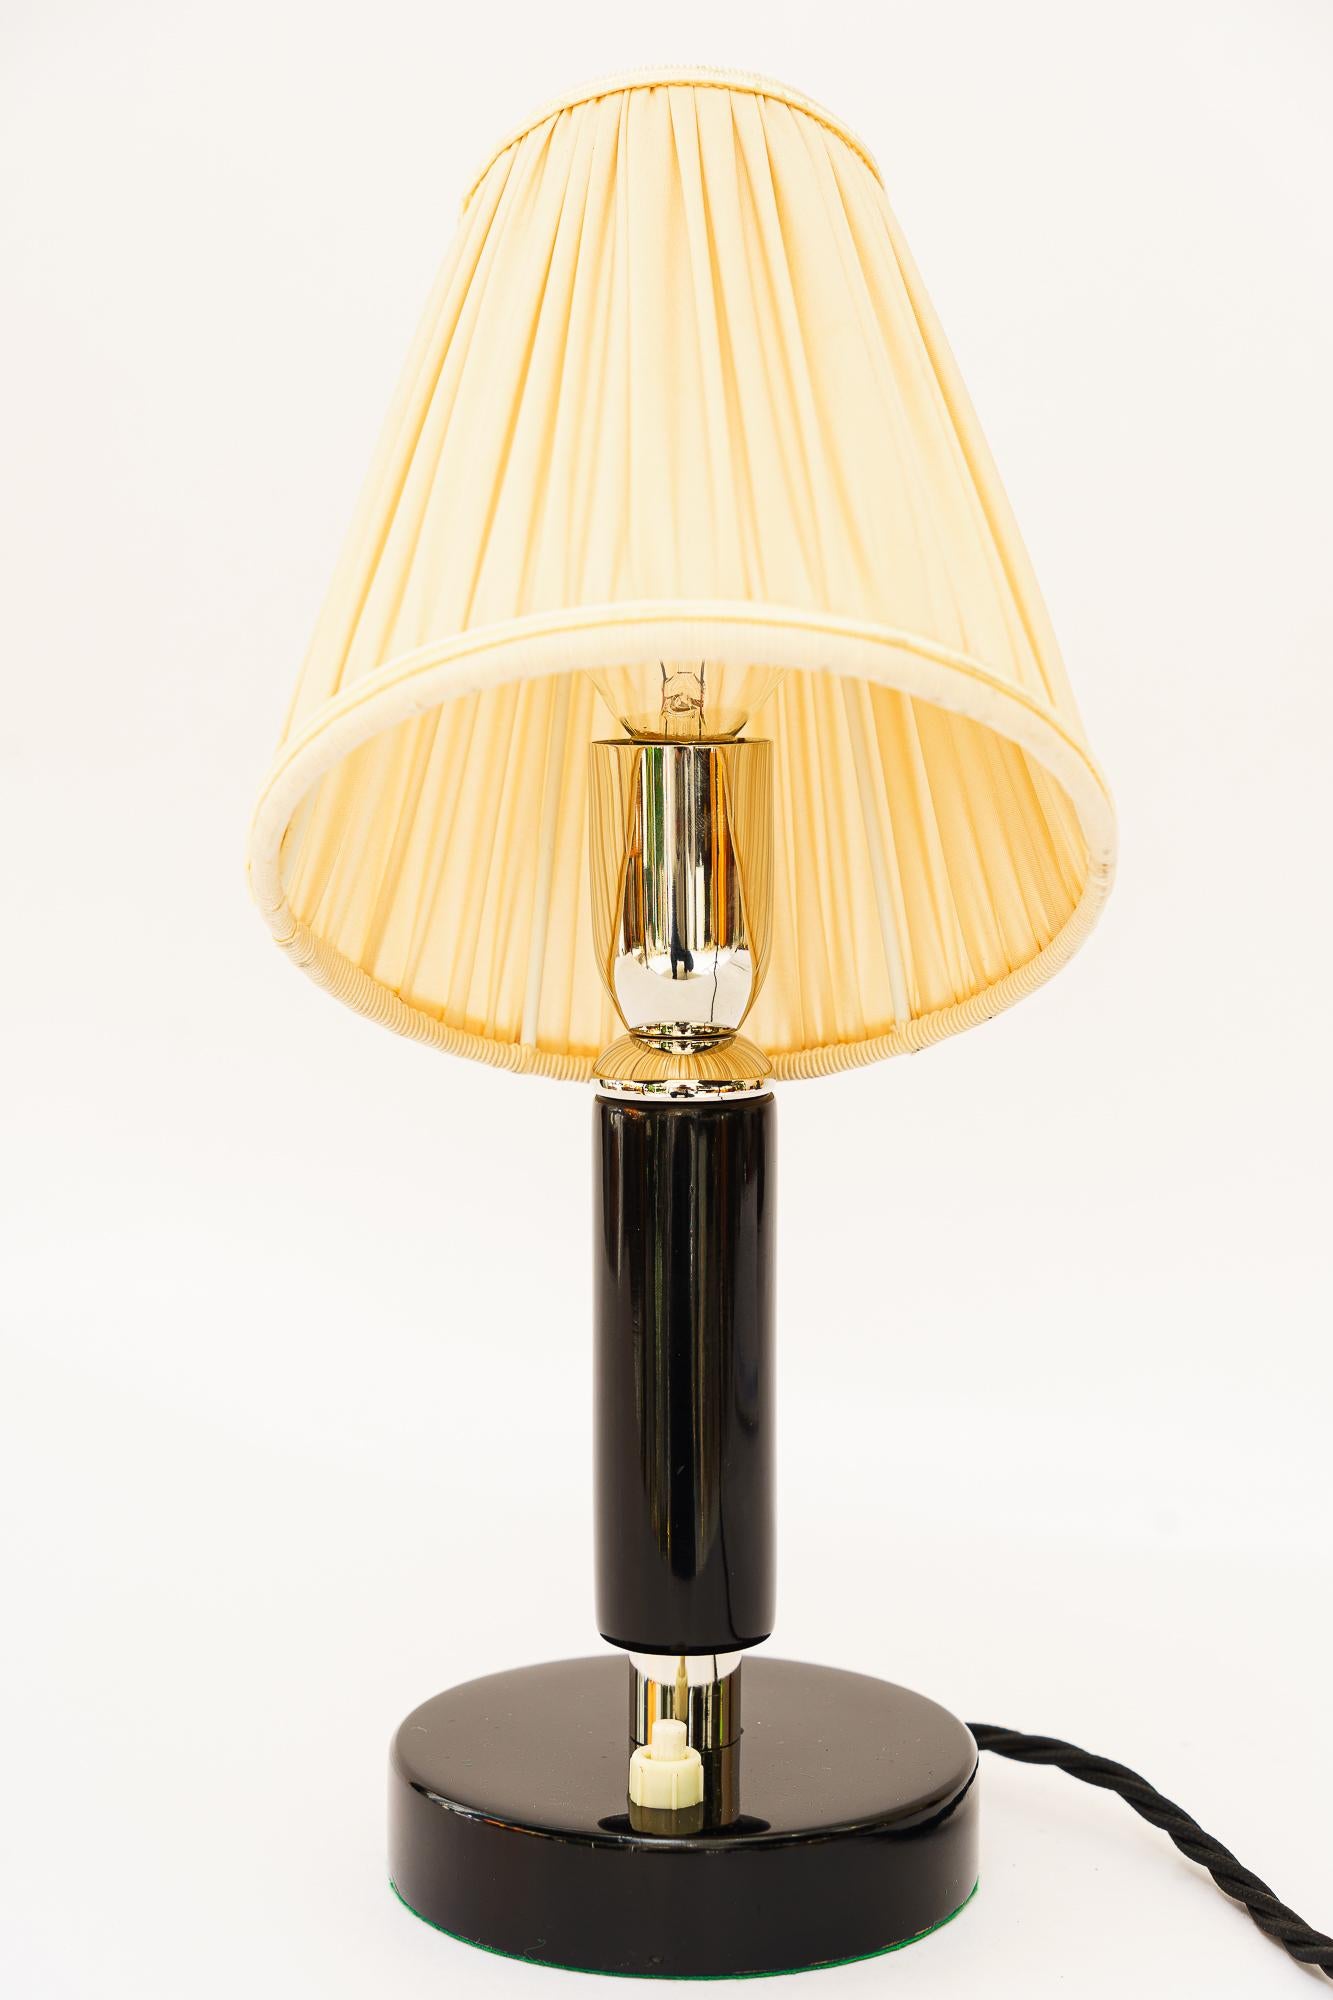 Art Deco nickel-plated wooden table lamp with fabric shade around 1920s
Brass (nickel plated)
The fabric shade is replaced ( new )